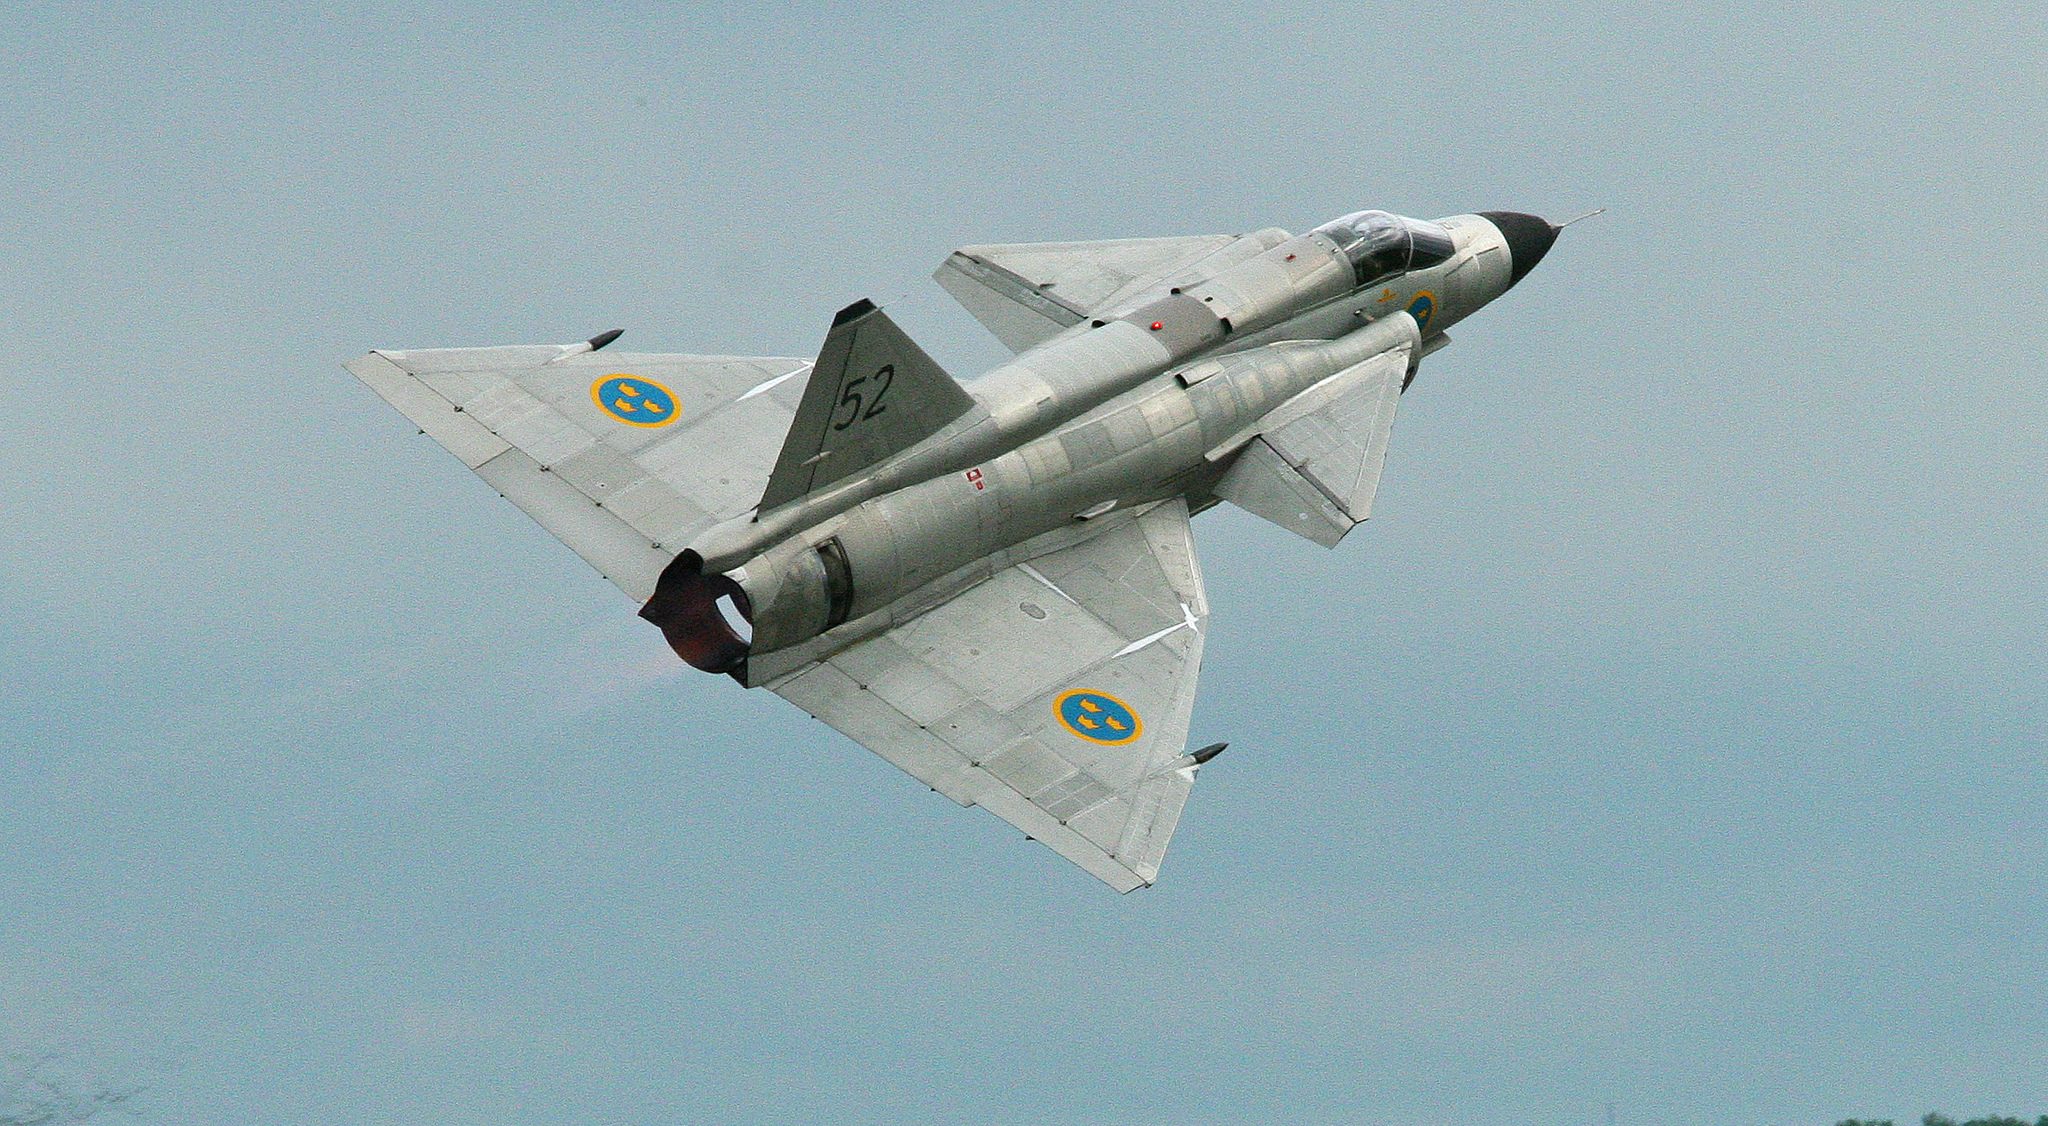 Saab 37 Viggen [Thunderbolt] Was Designed And Ready For Action Against Russia